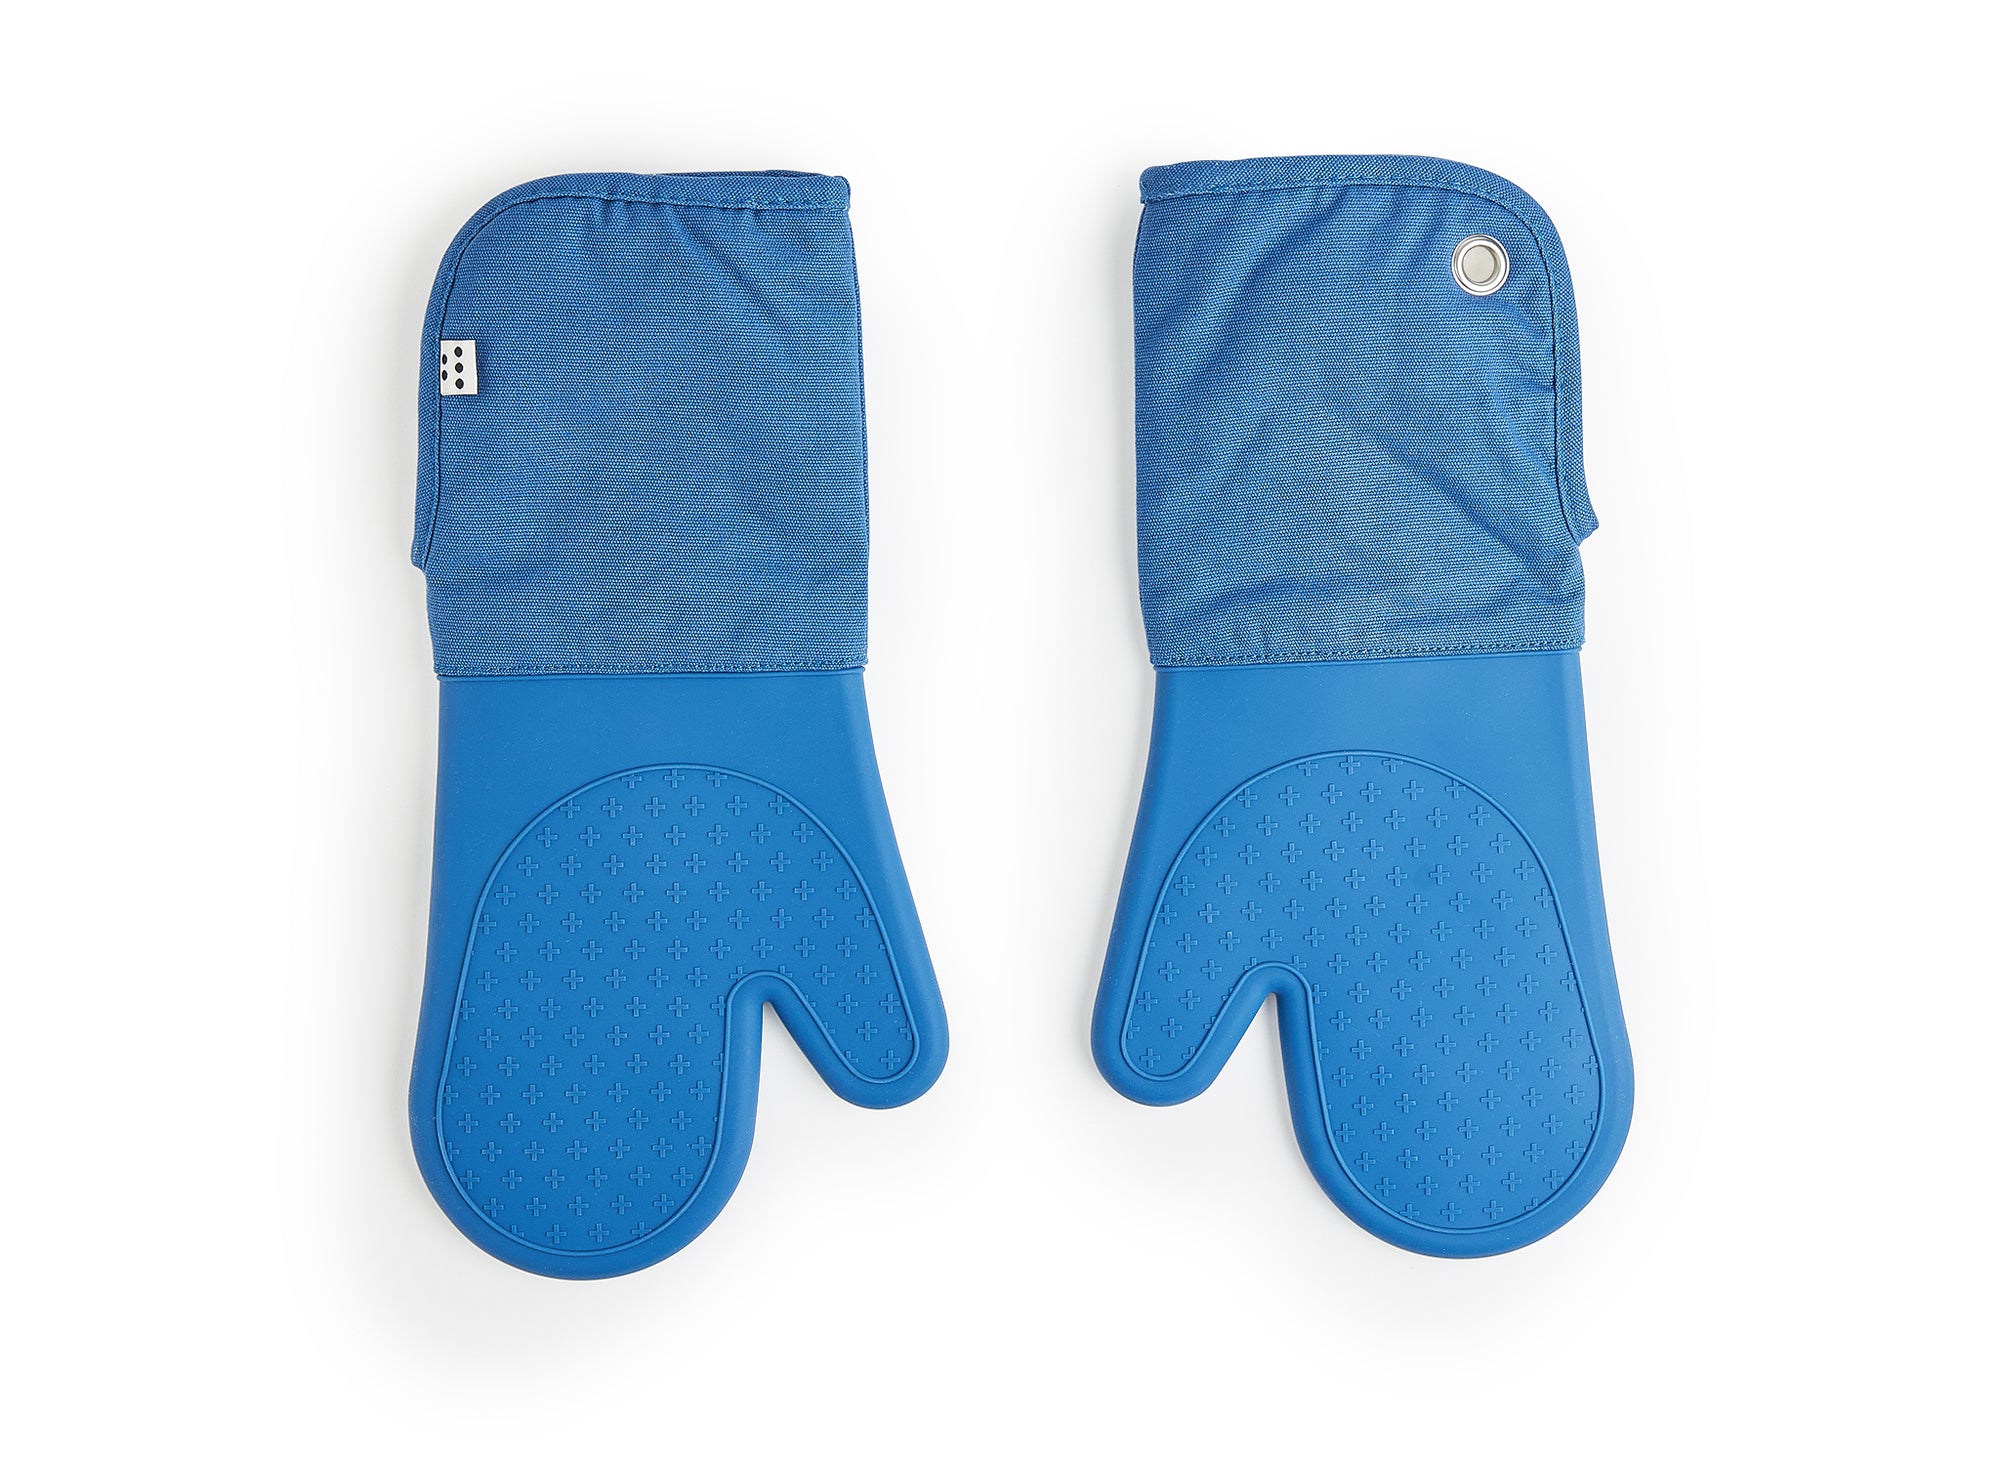 Homwe HOMWE Silicone Oven Mitt, Oven Mitts with Quilted Liner